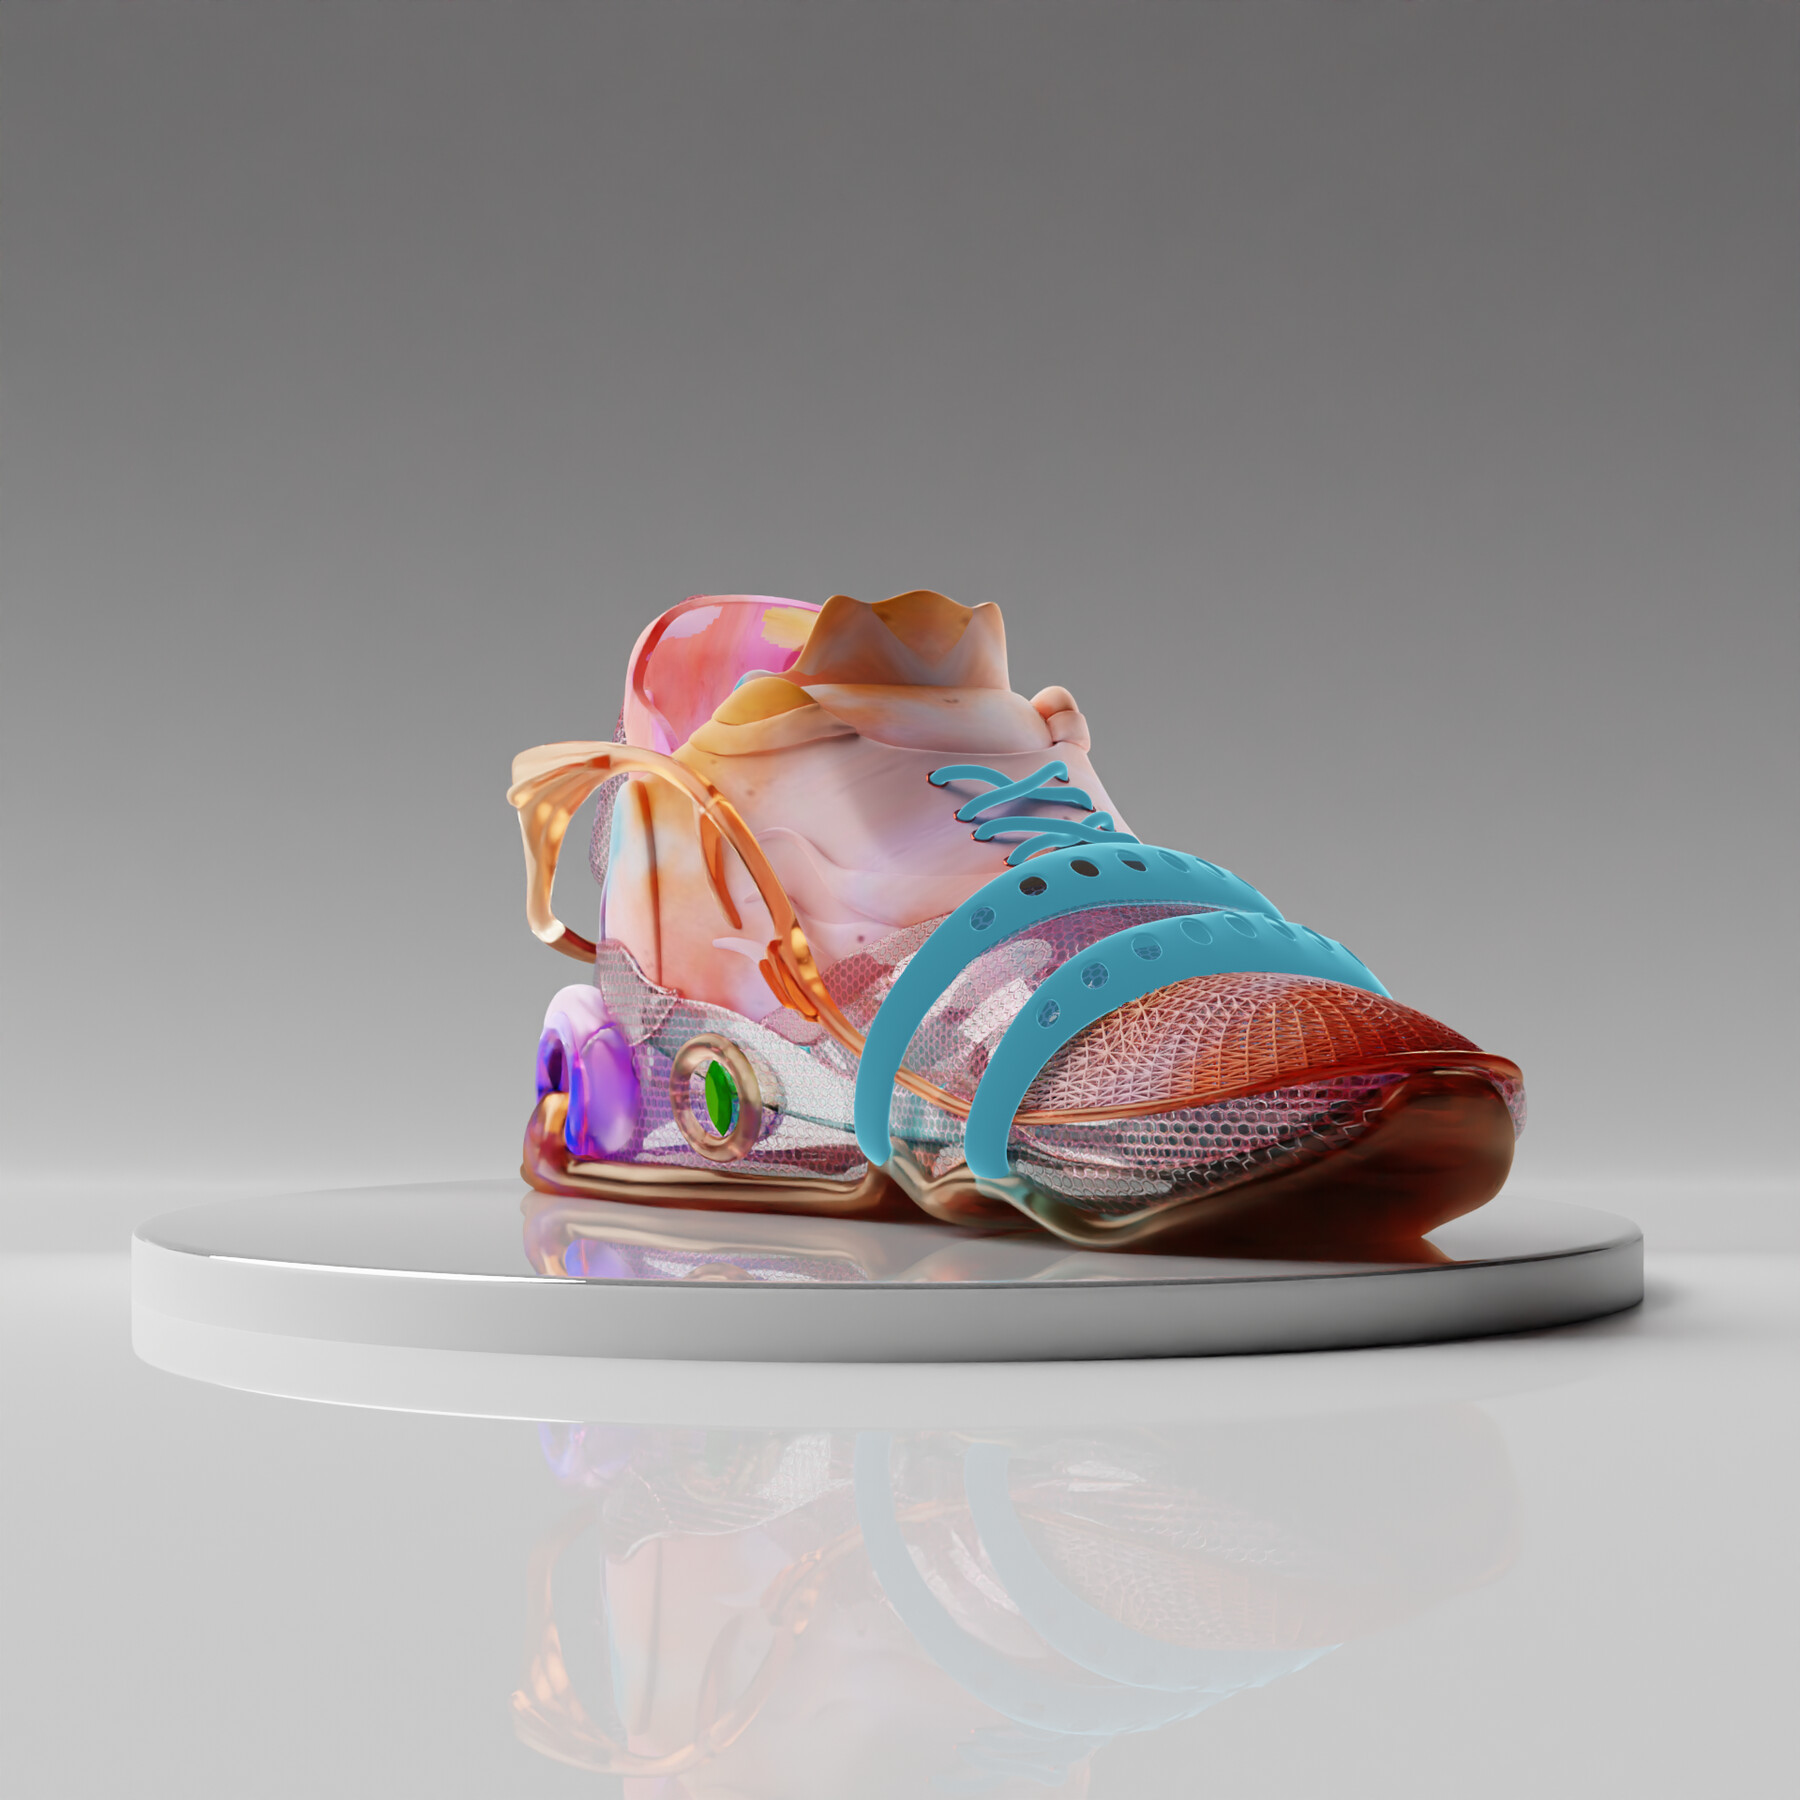 ArtStation - Sneakers with a pink hue | Resources